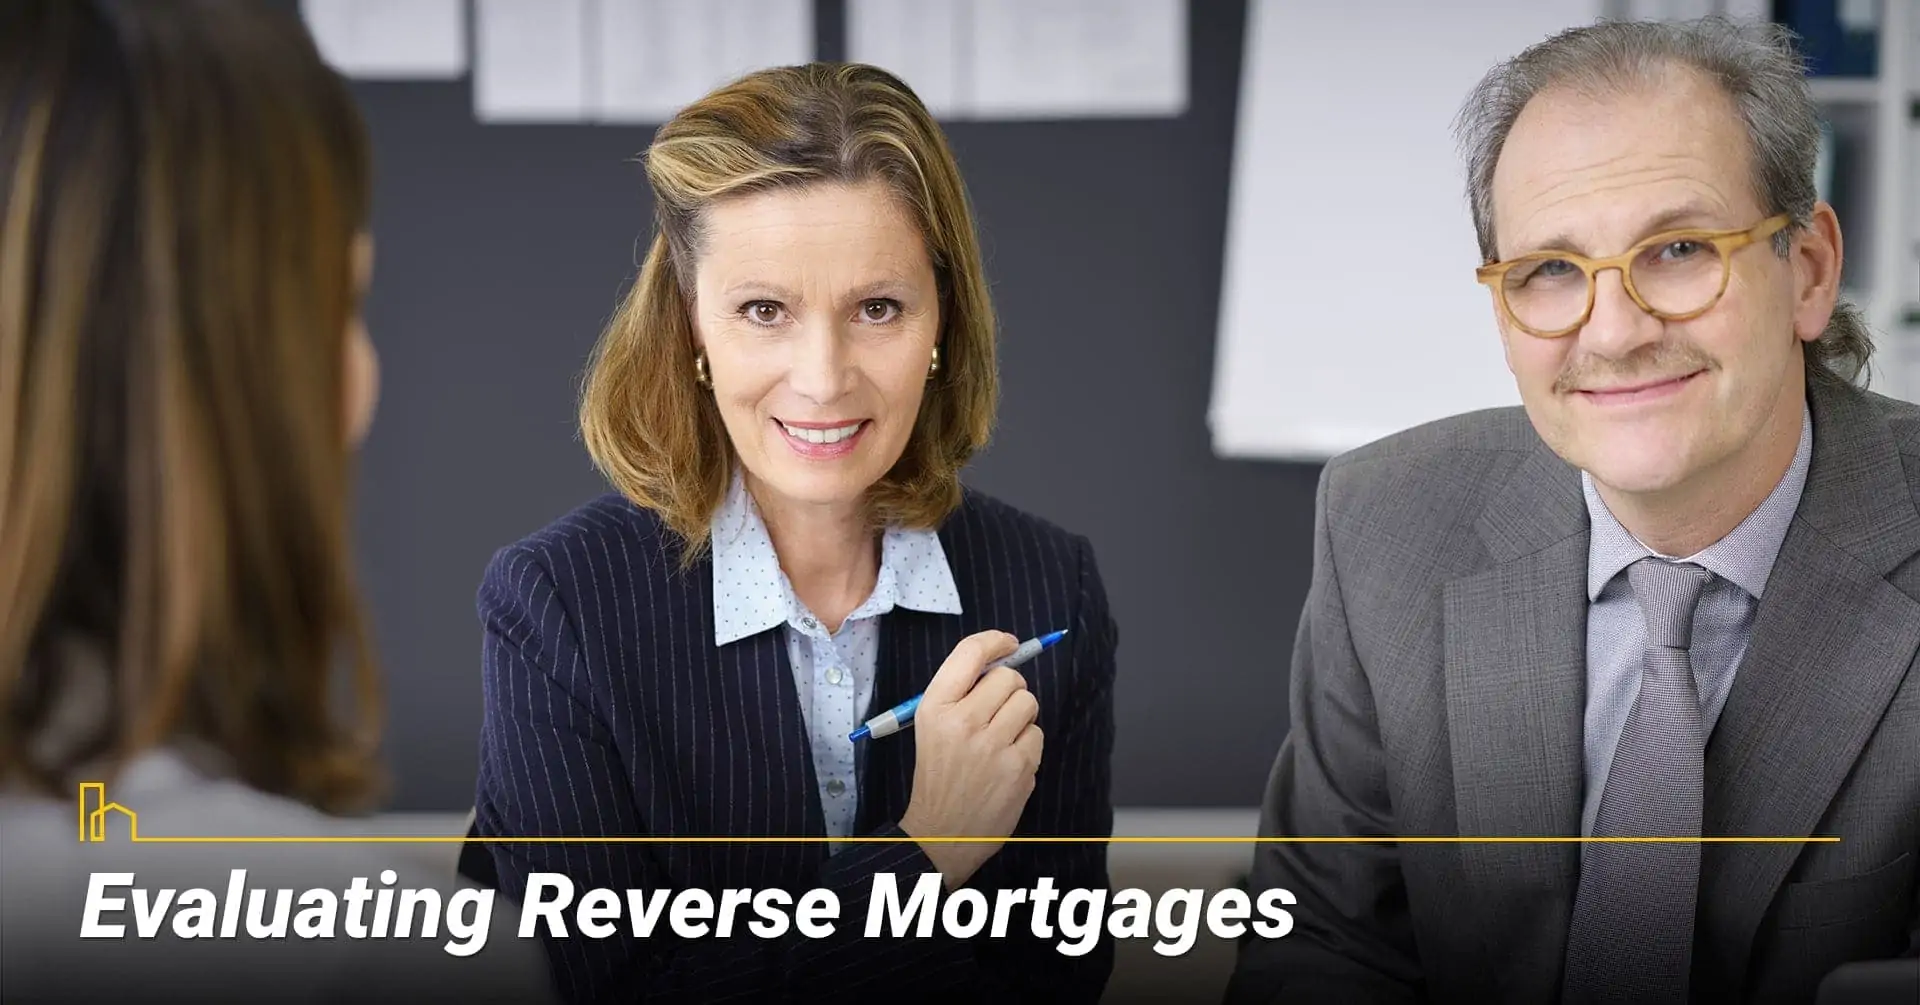 How Do I Evaluate Reverse Mortgages? factors to consider when making decision on a reverse mortgage